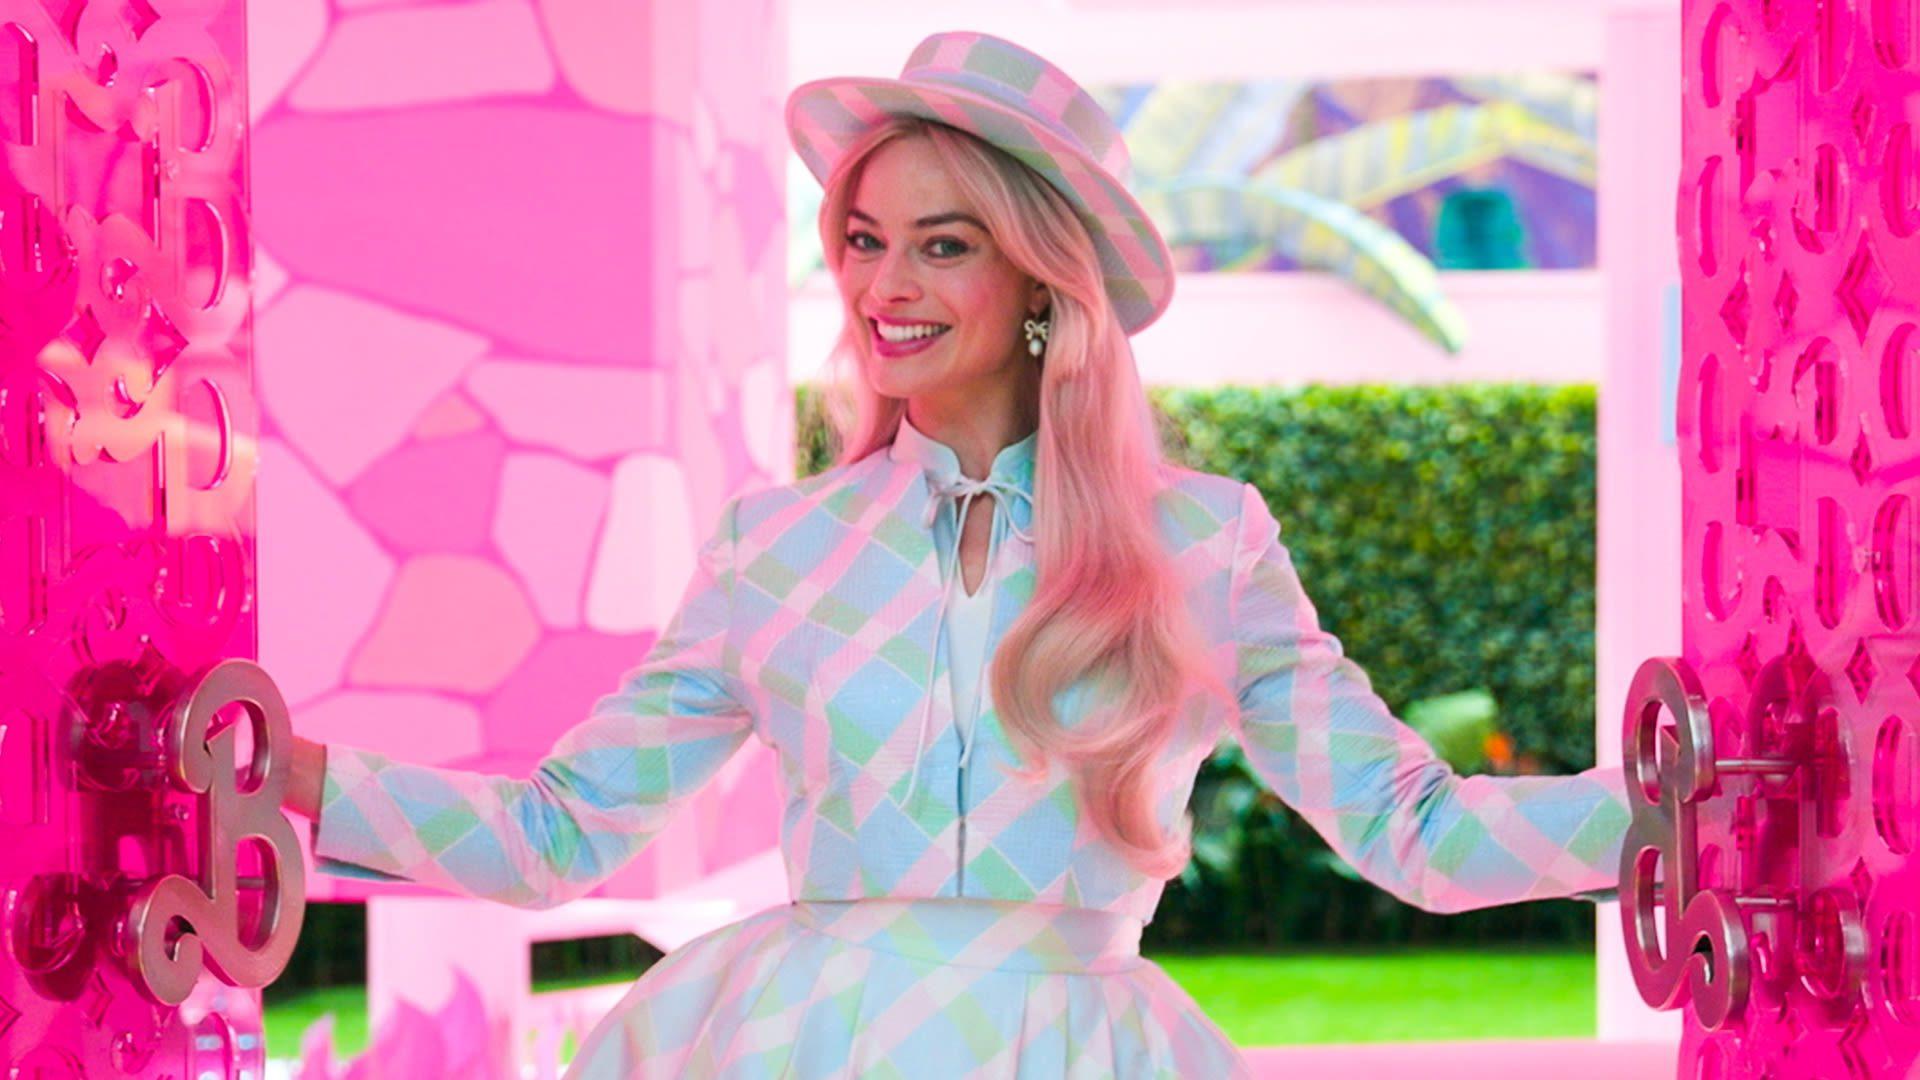 Image of Margot Robbie as part of the Barbie Dreamhouse walkthrough for Architectural Digest.